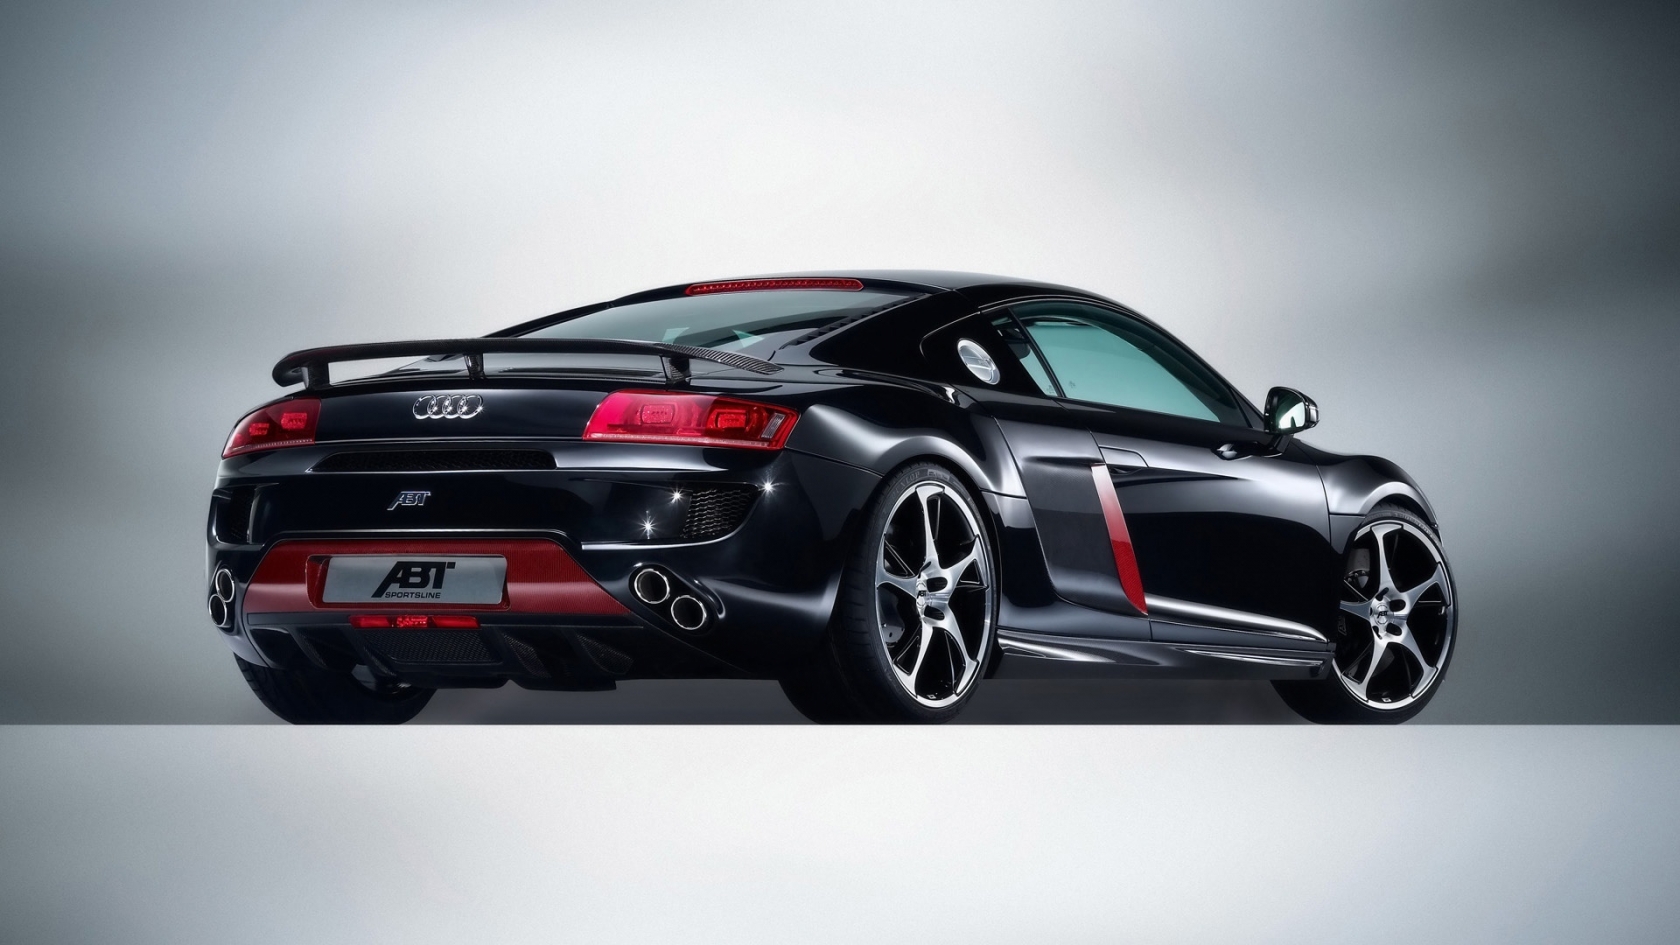 2008 Abt Audi R8 - Rear Angle for 1680 x 945 HDTV resolution